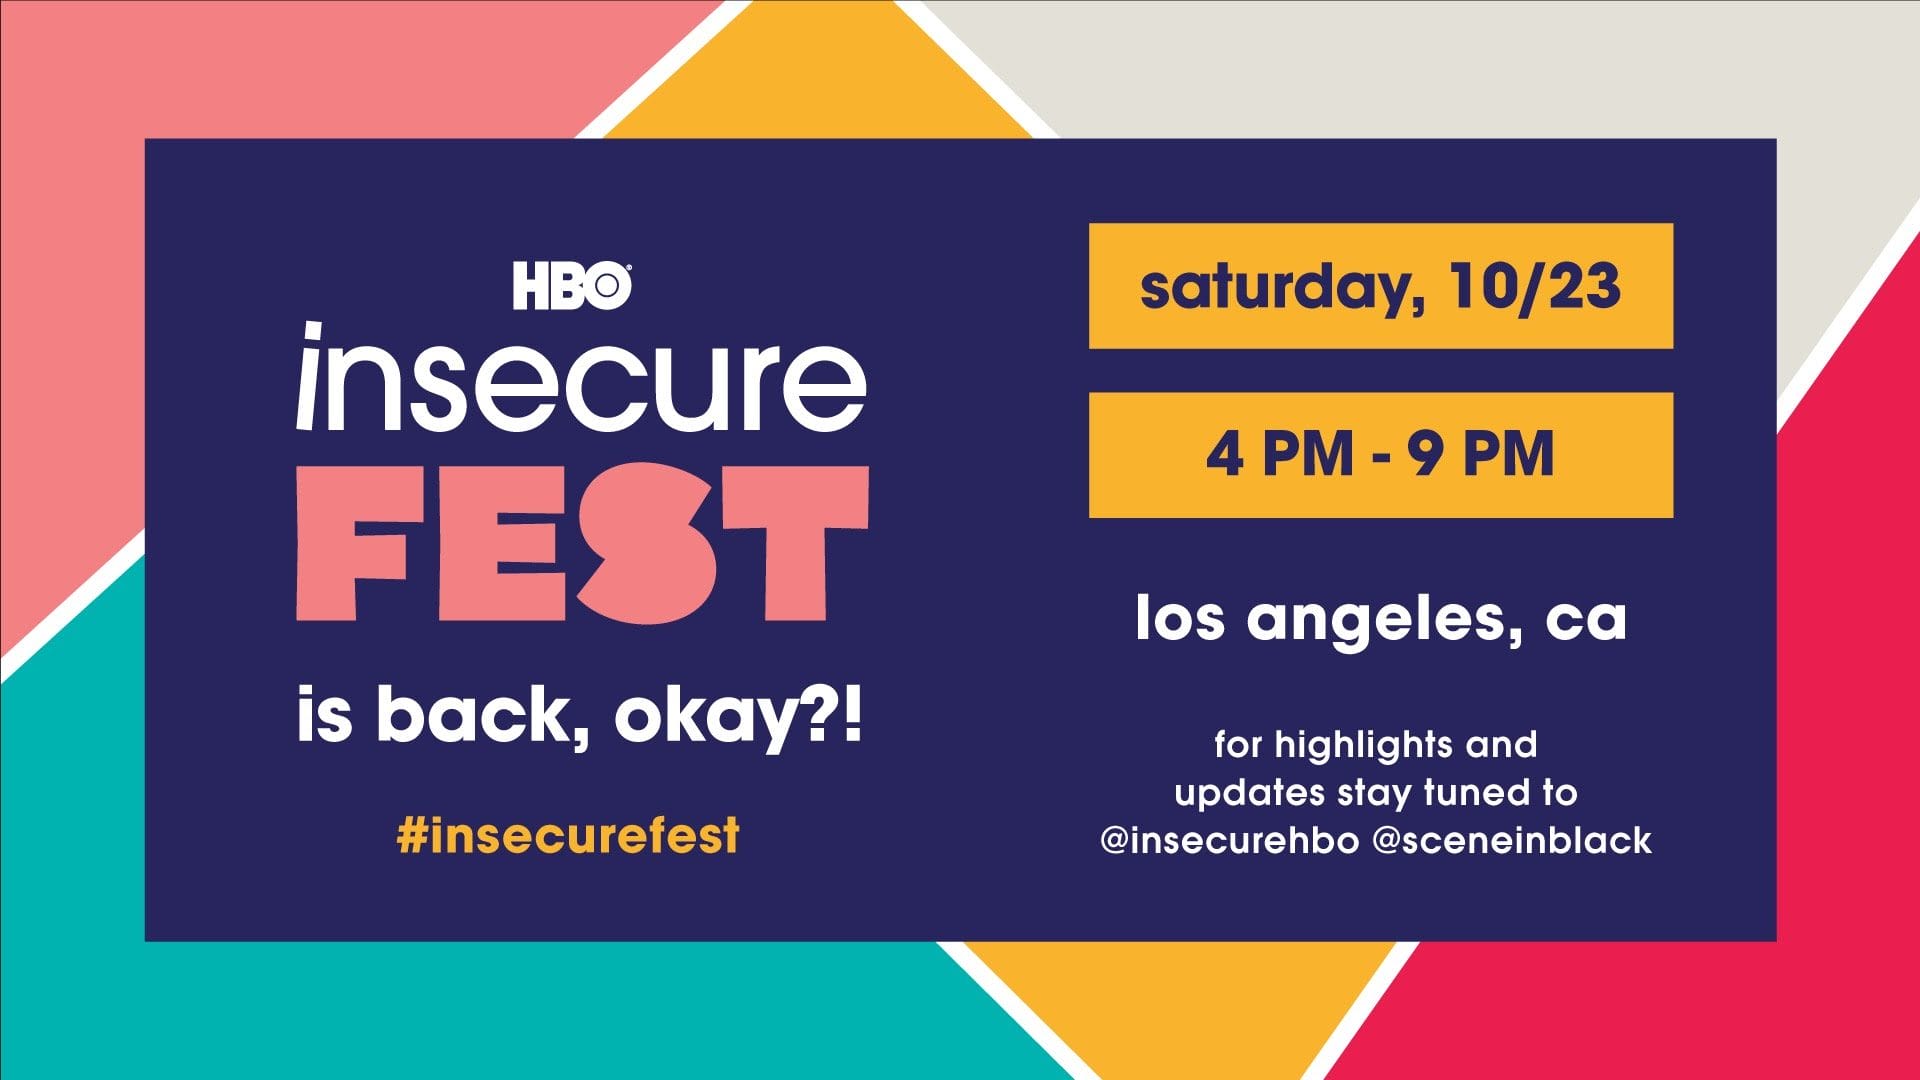 HBO Celebrates The Fifth And Final Season Of Insecure With Insecure Fest